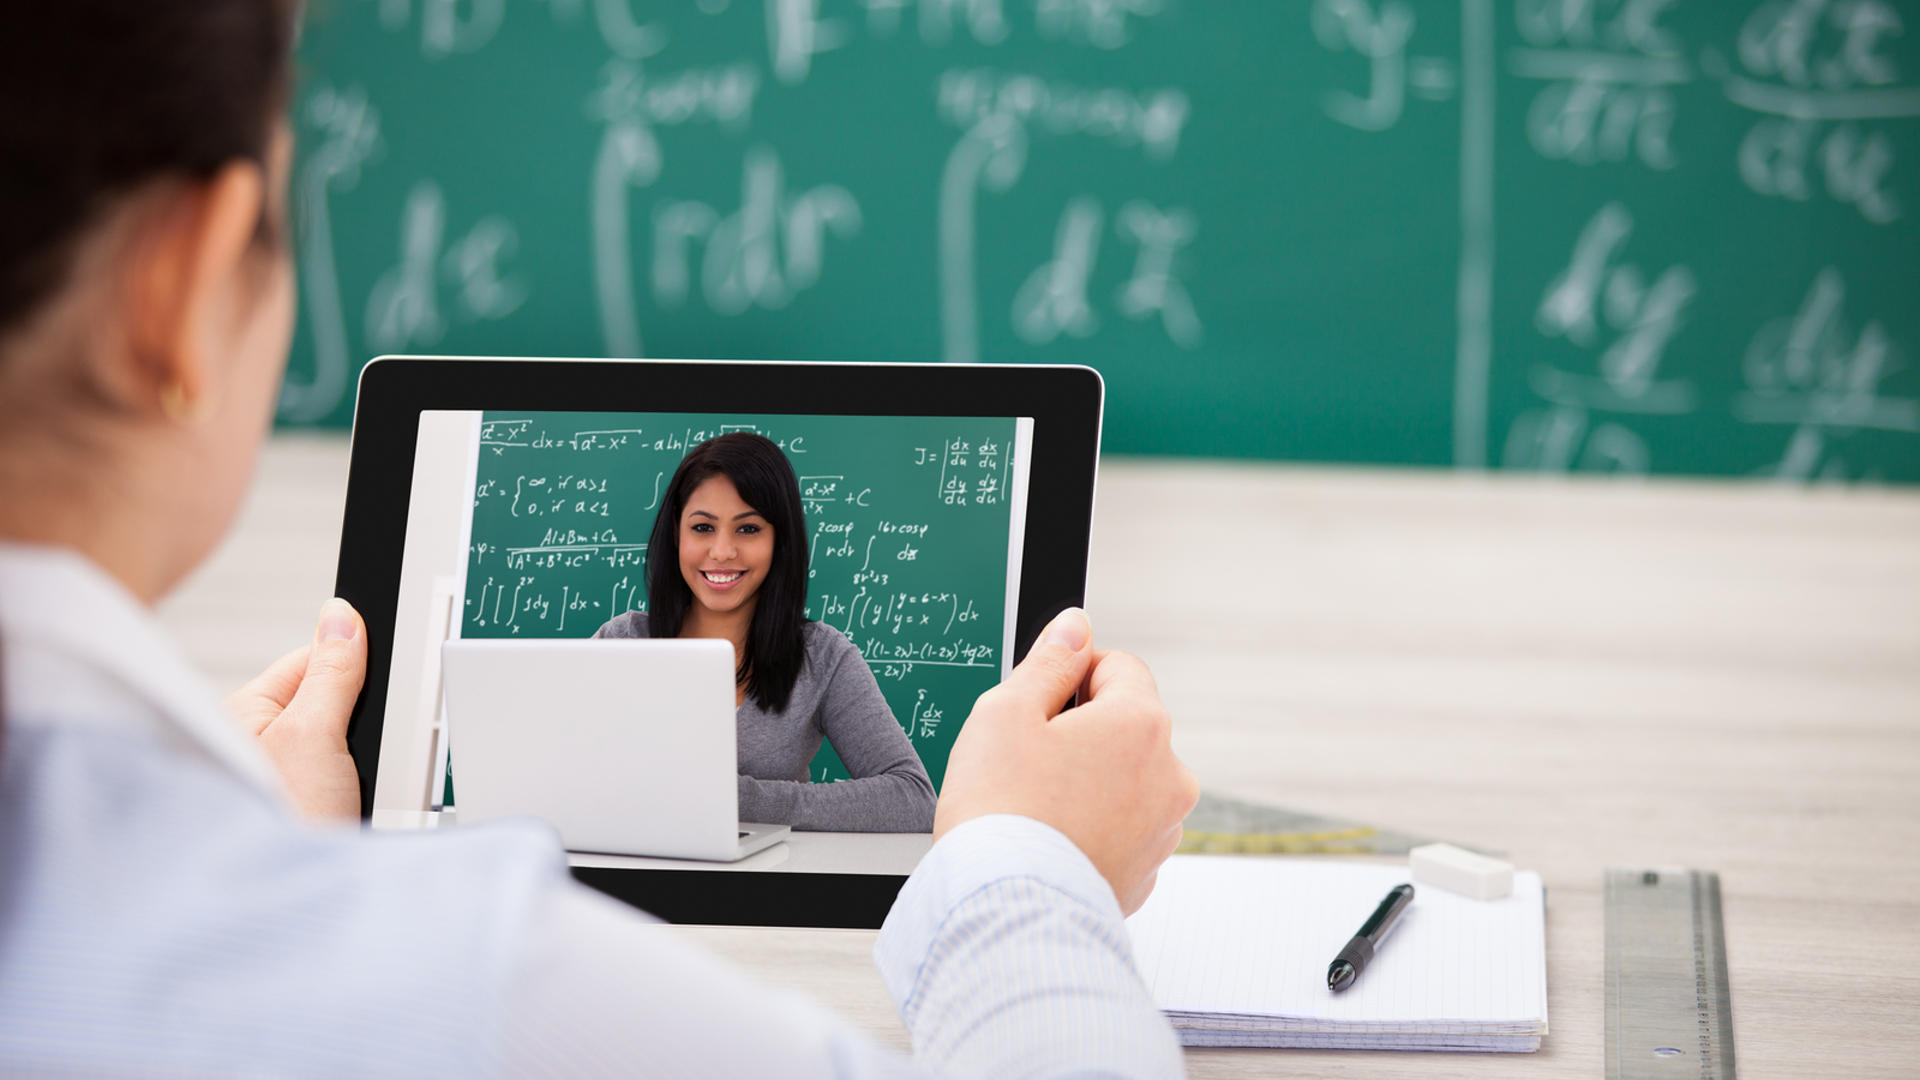 Close-up Of Woman Having Video Chat On Digital Tablet In Classroom